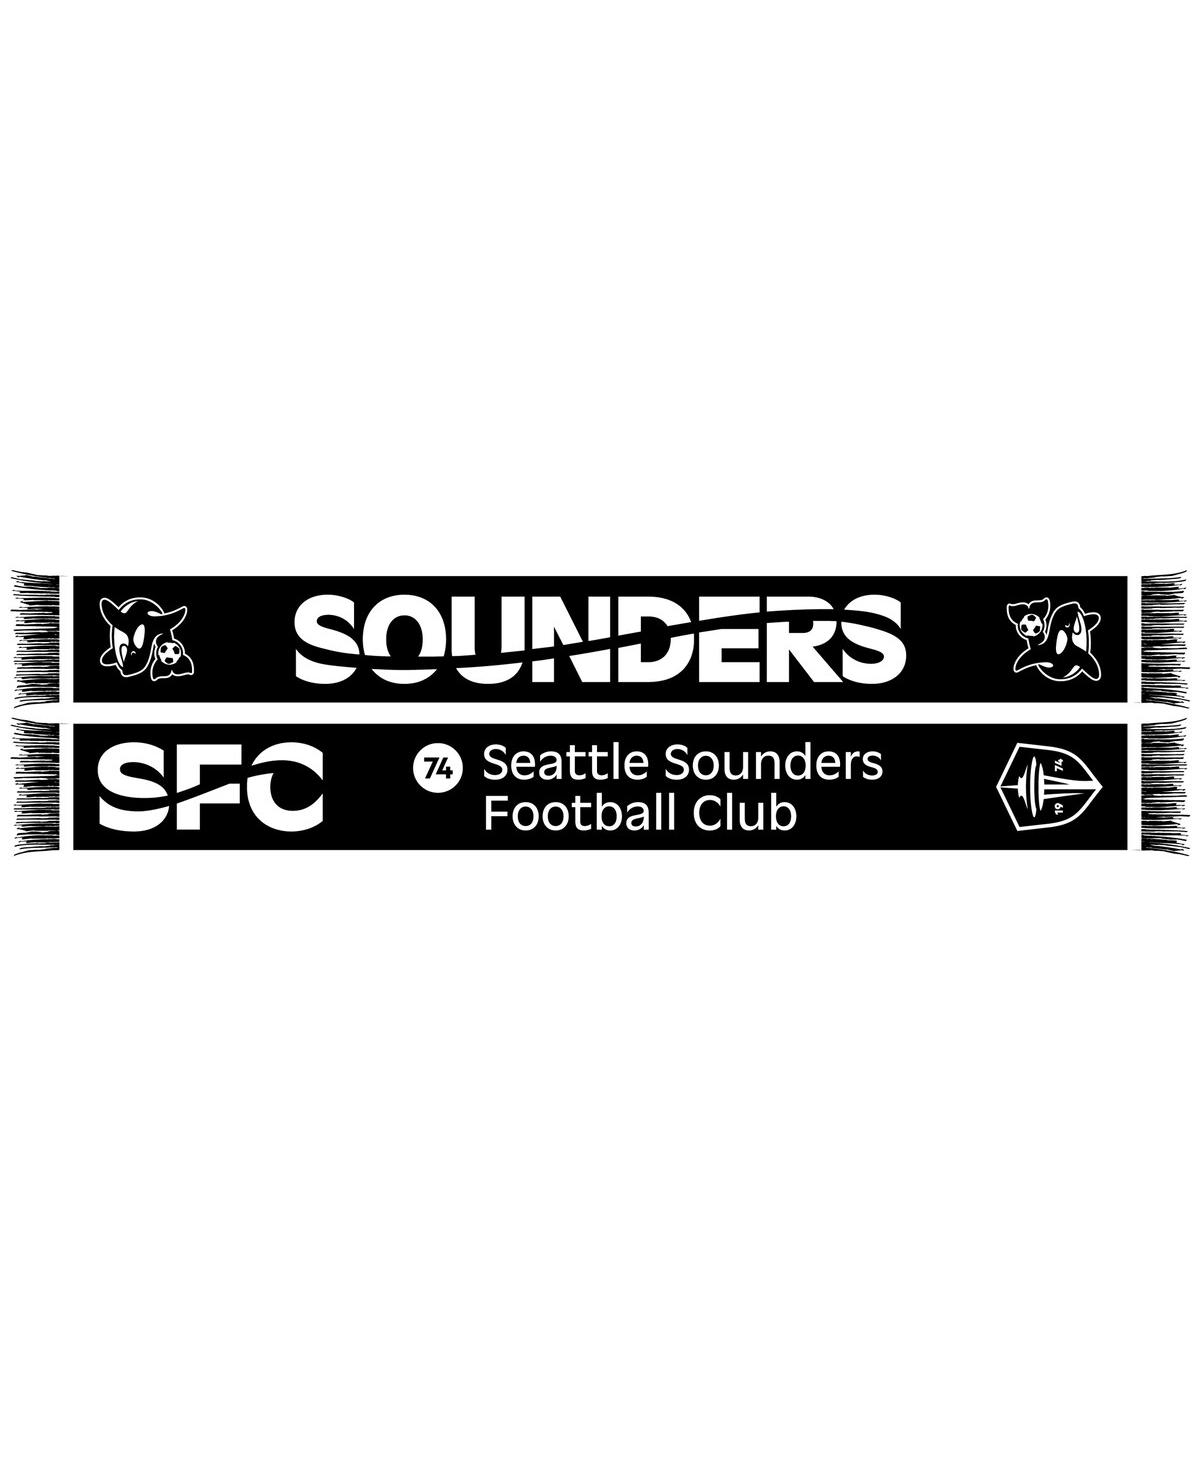 Men's and Women's Seattle Sounders Fc Orca Scarf - Black